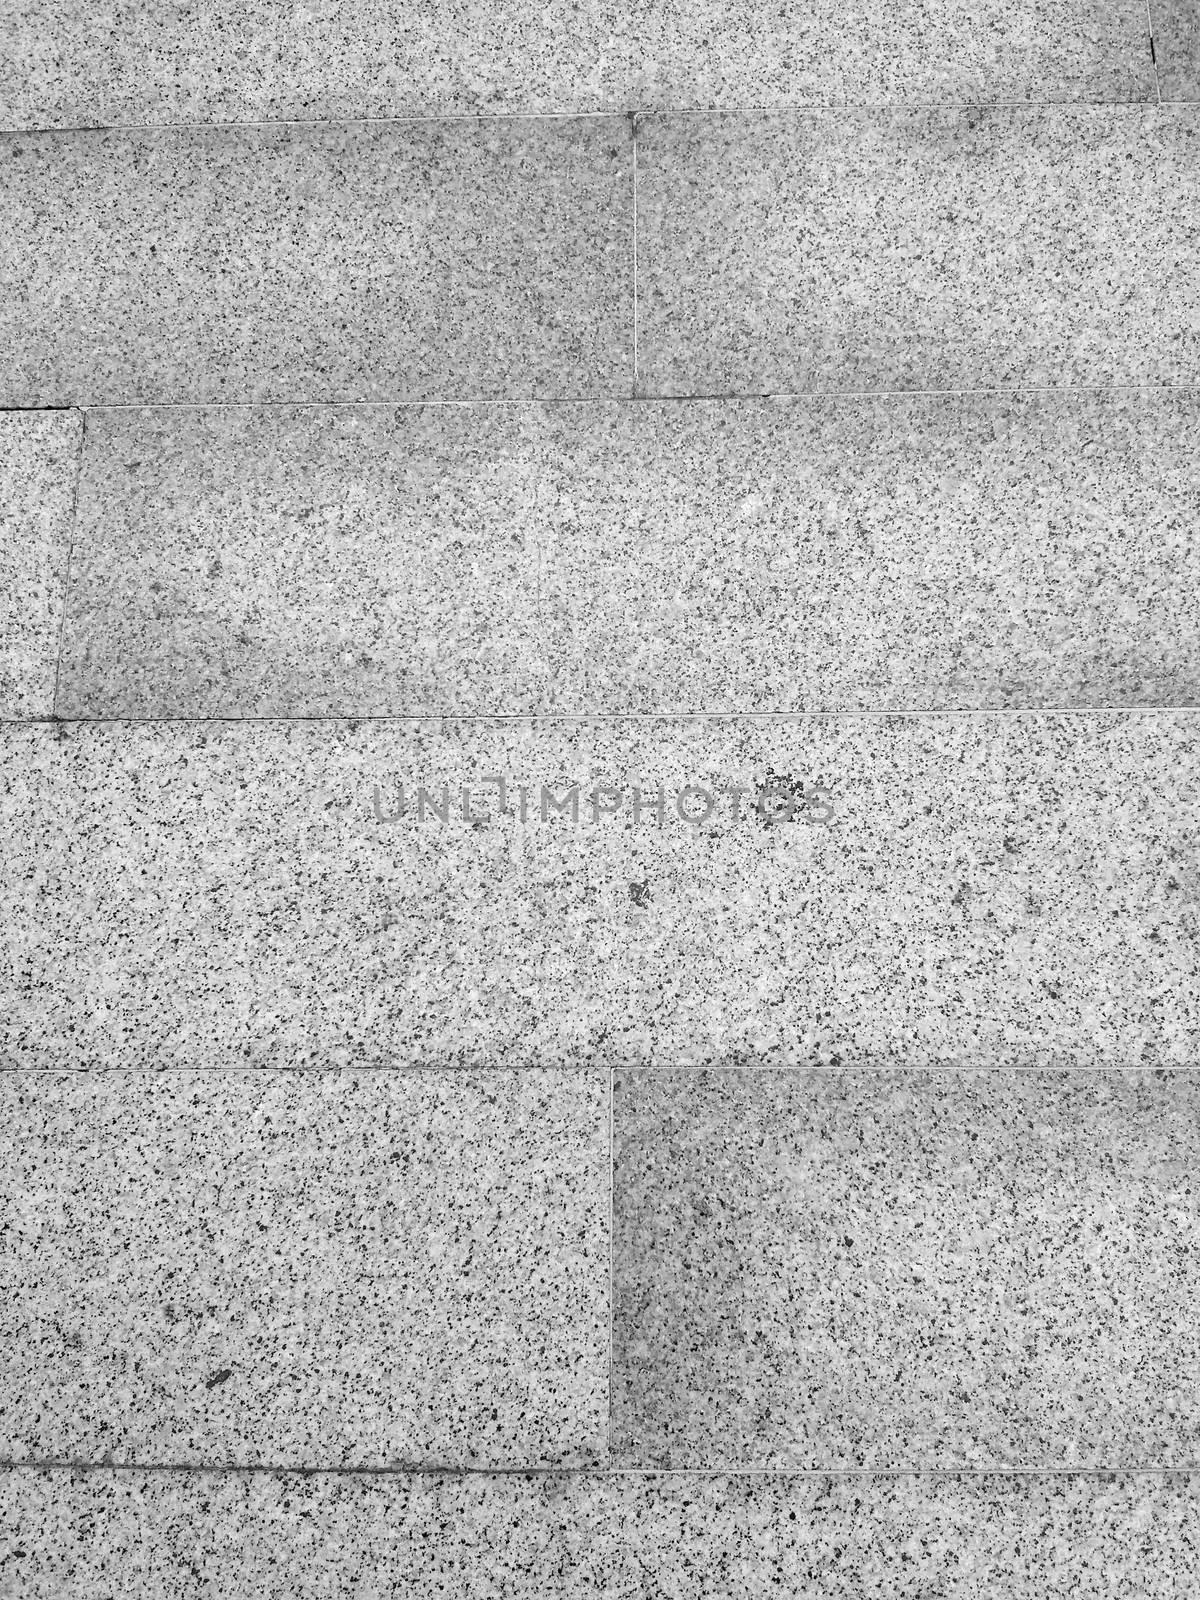 Grey color stone concrete material floor. by gnepphoto